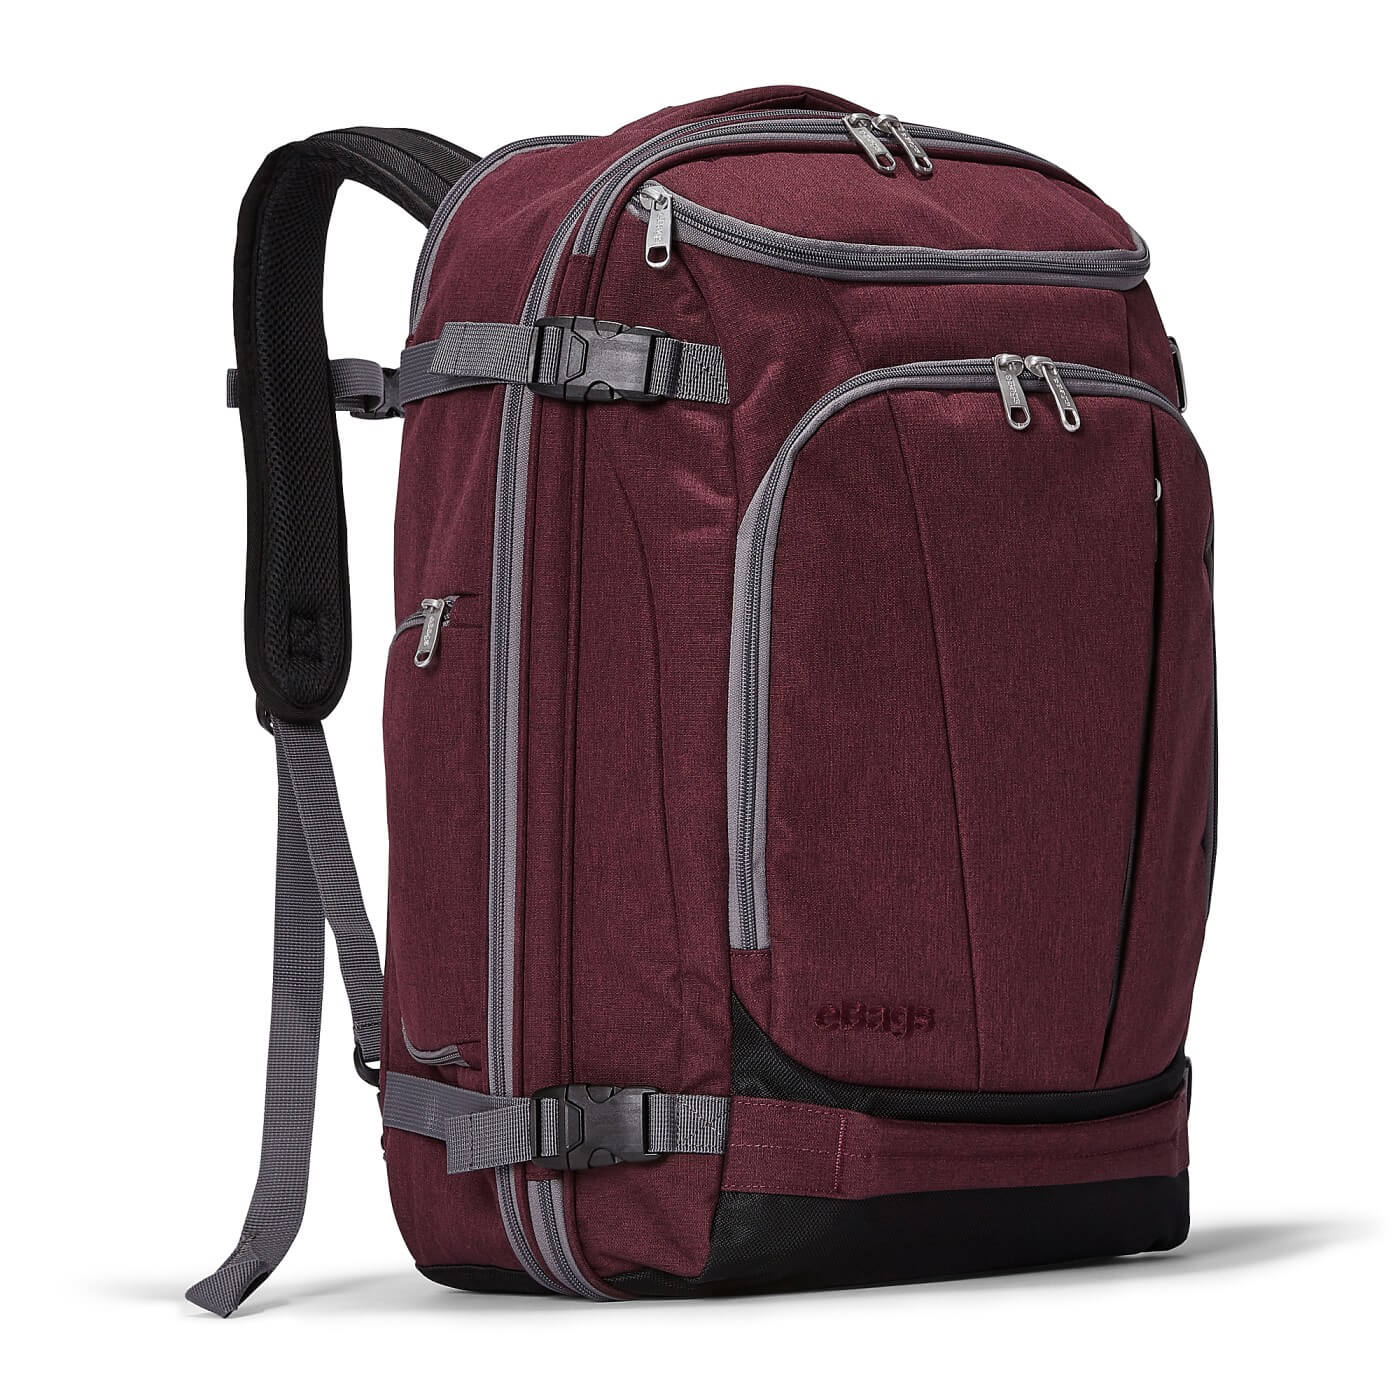 ebags mother lode red backpack grey zippers